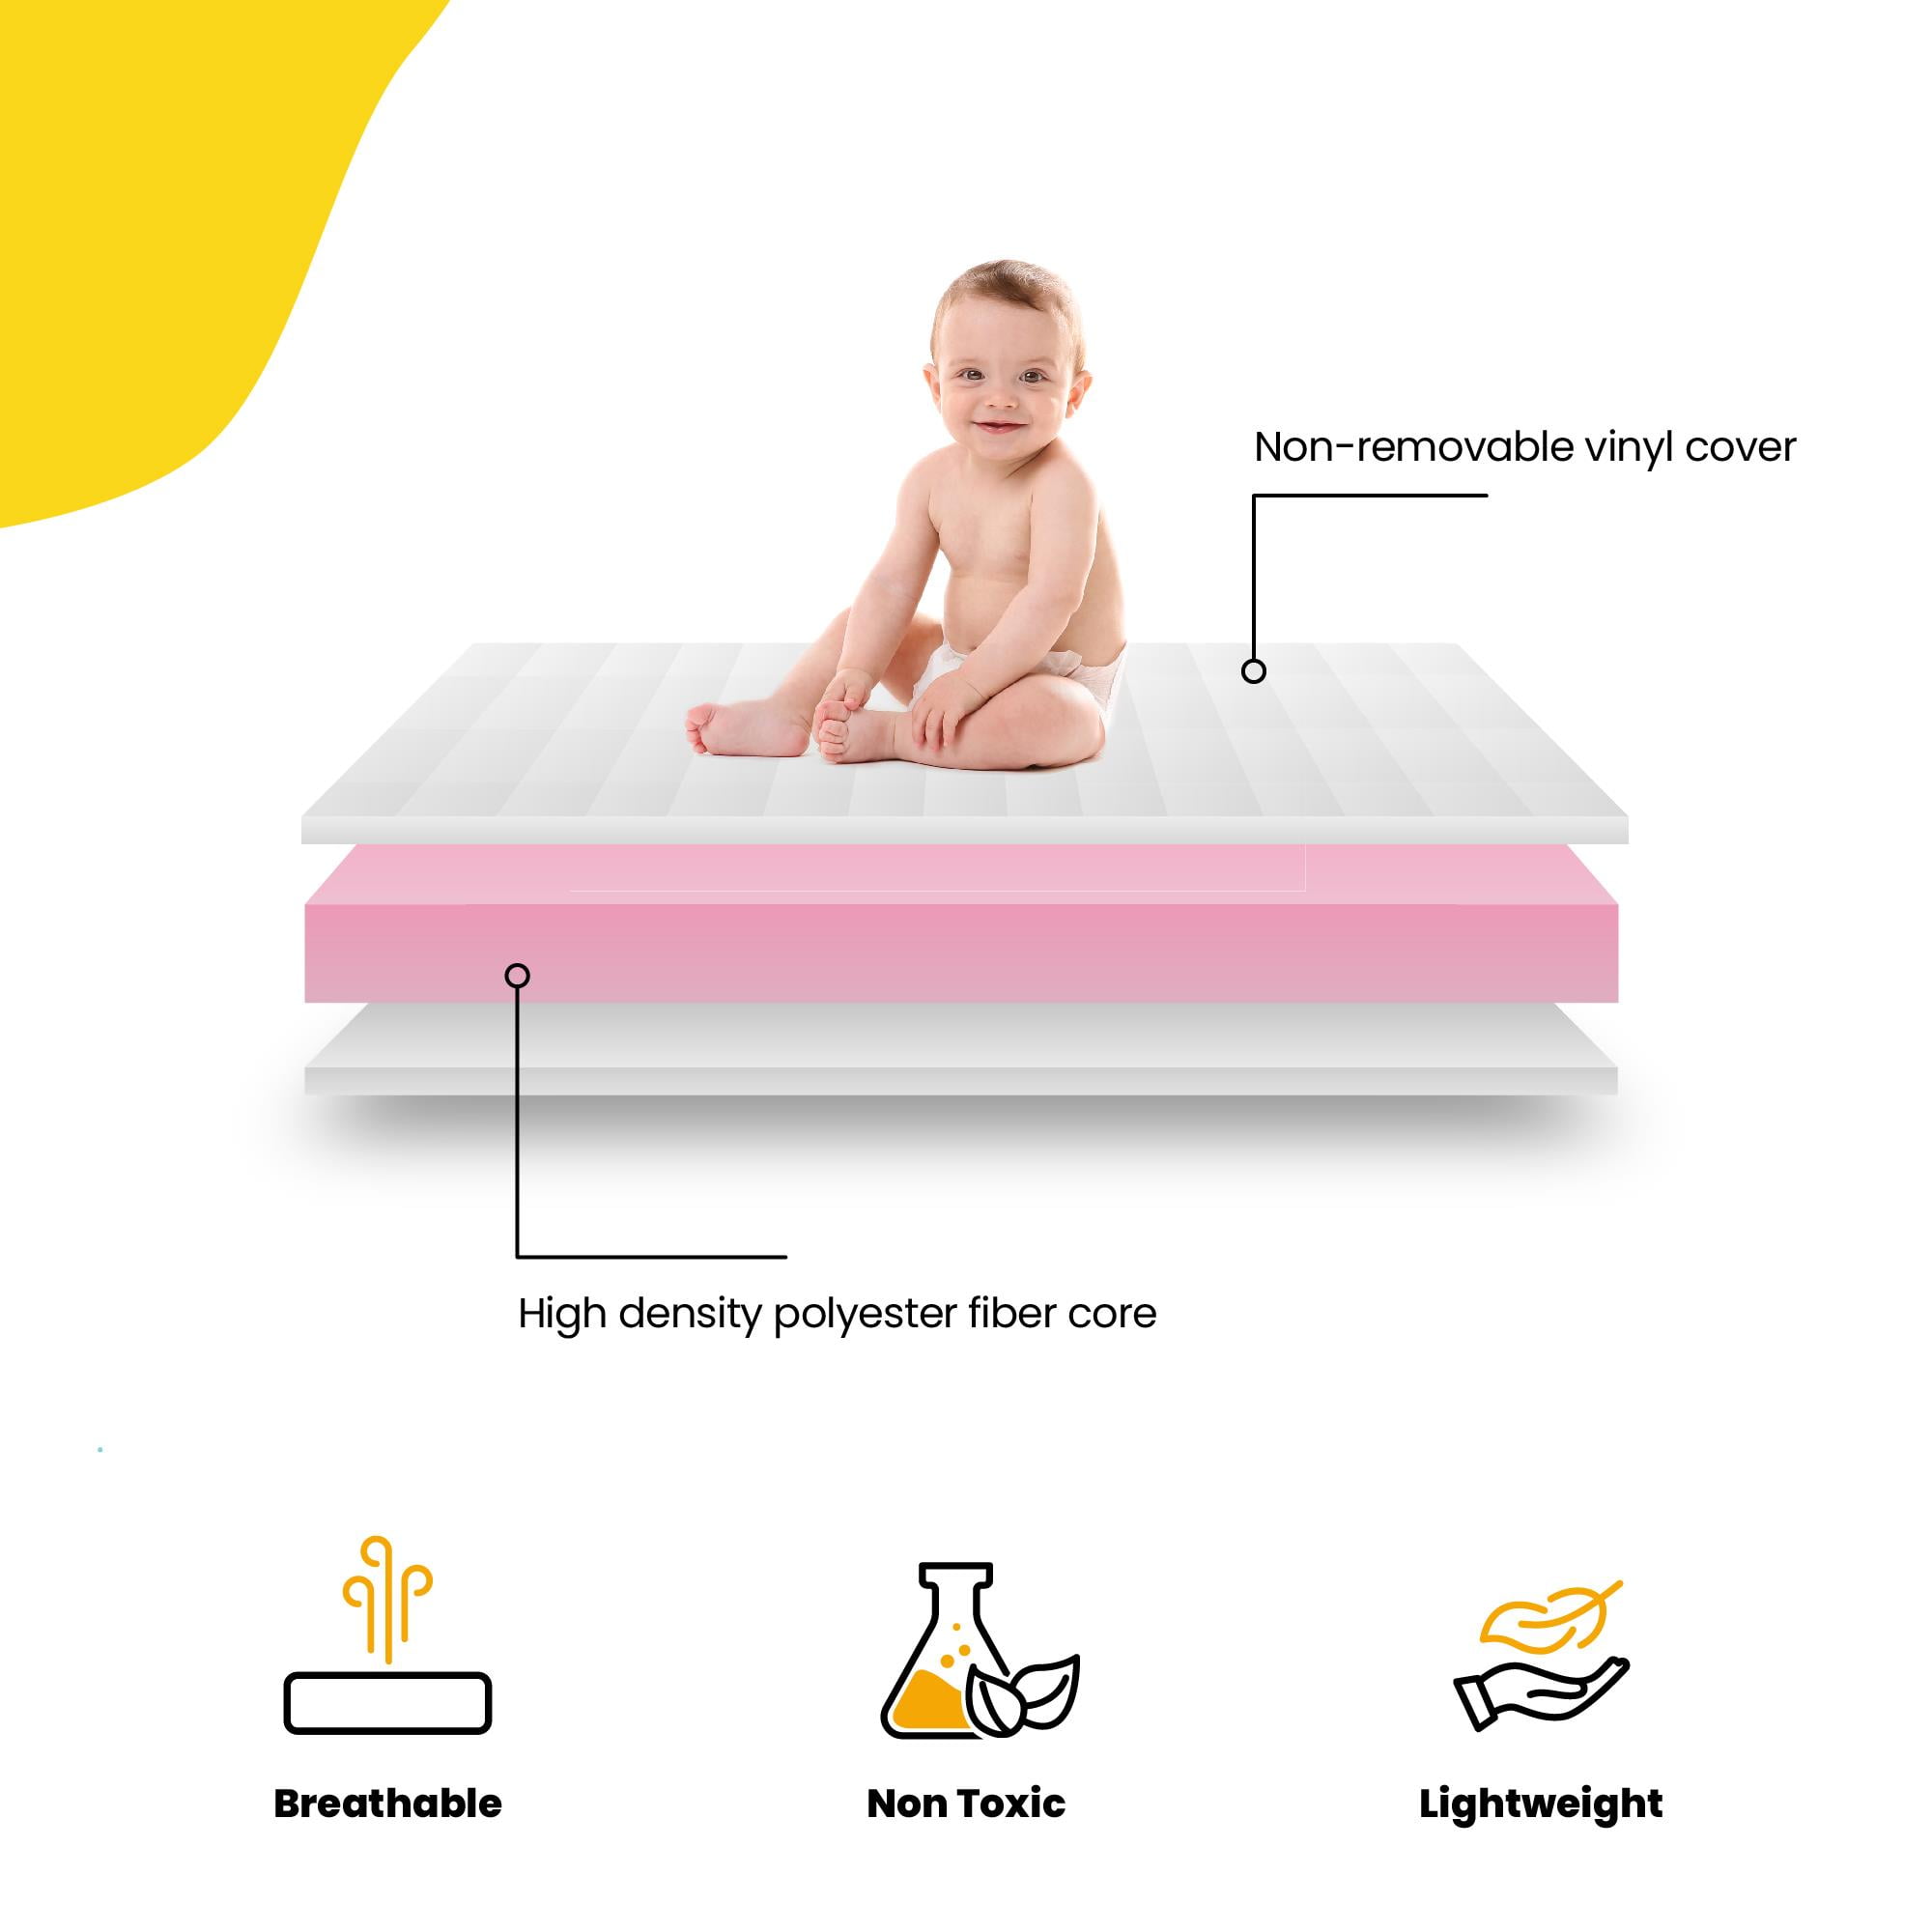 Komcot Baby Crib Mattress, 5 Waterproof Baby Mattress for Crib, Dual Sided  Comfort Memory Foam Infant and Toddler Bed Mattress, Removable Cover, Fits